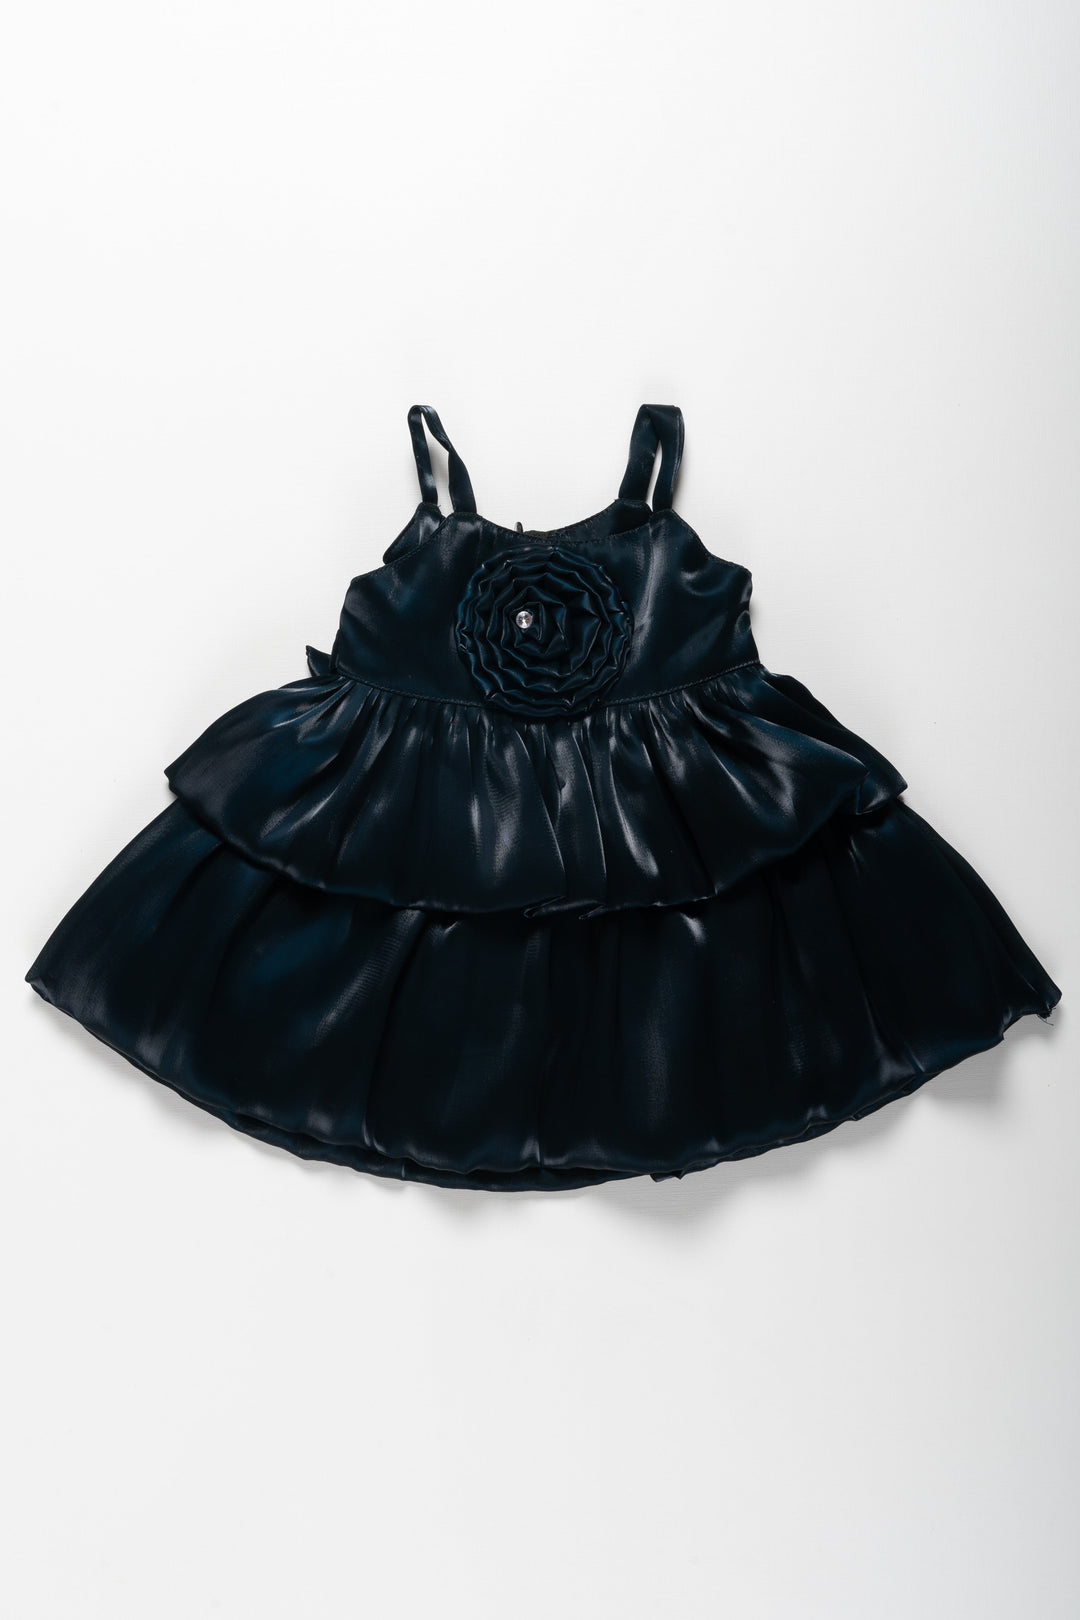 The Nesavu Girls Fancy Party Frock Charcoal Grey Organza Party Dress with Rosette Detail for Girls Nesavu 12 (3M) / Gray / Organza PF171B-12 Girls Grey Organza Ruffle Dress | Rosette Party Dress for Children | The Nesavu